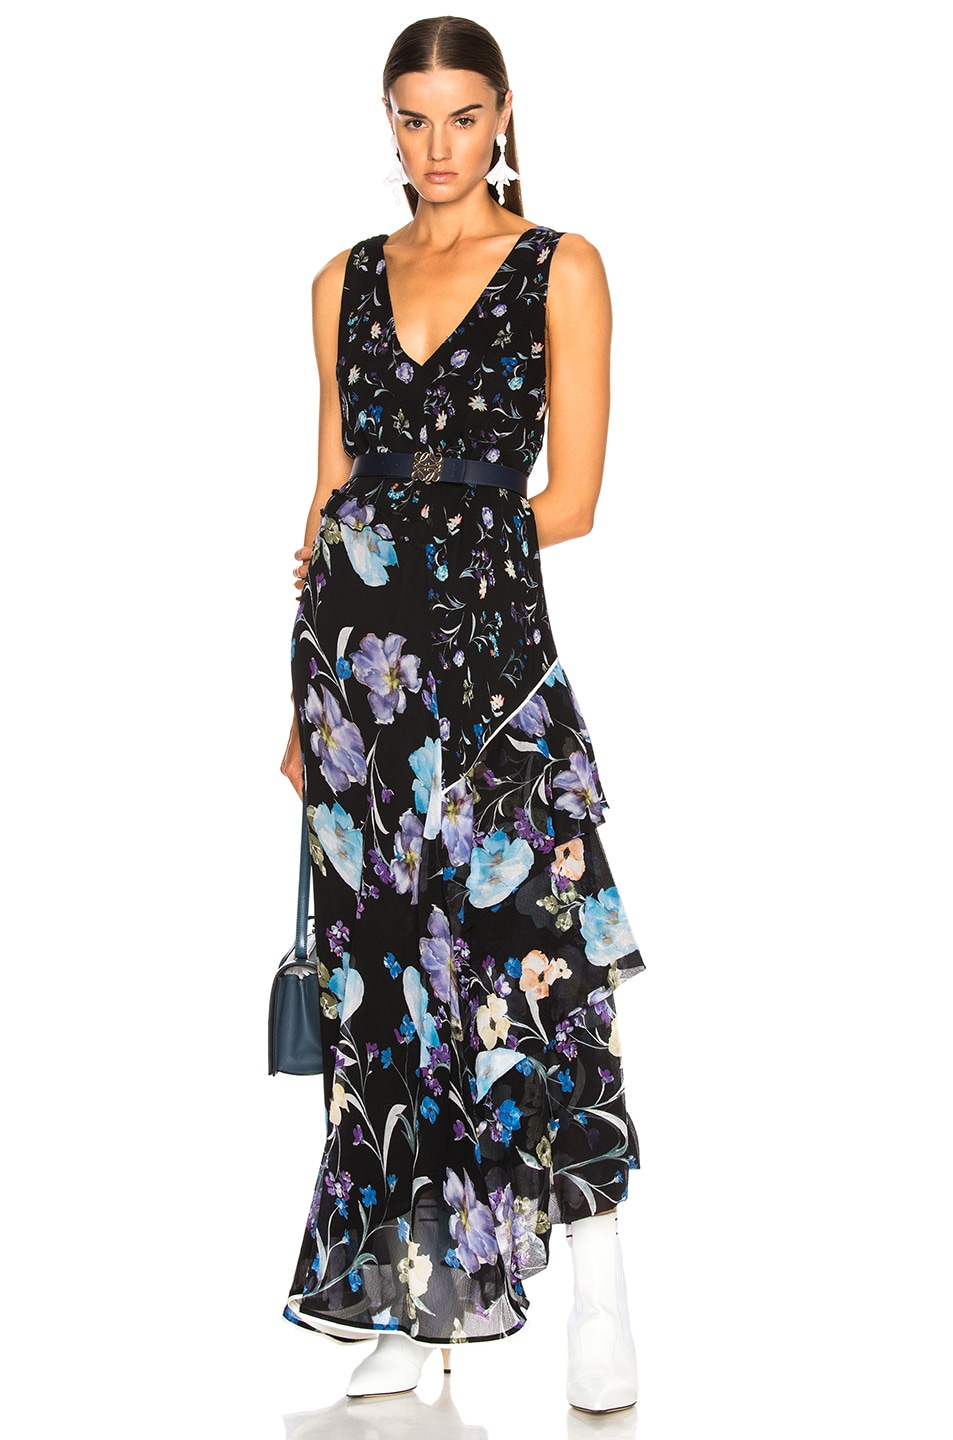 Image 1 of 3.1 phillip lim Floral Ruffle Dress in Black